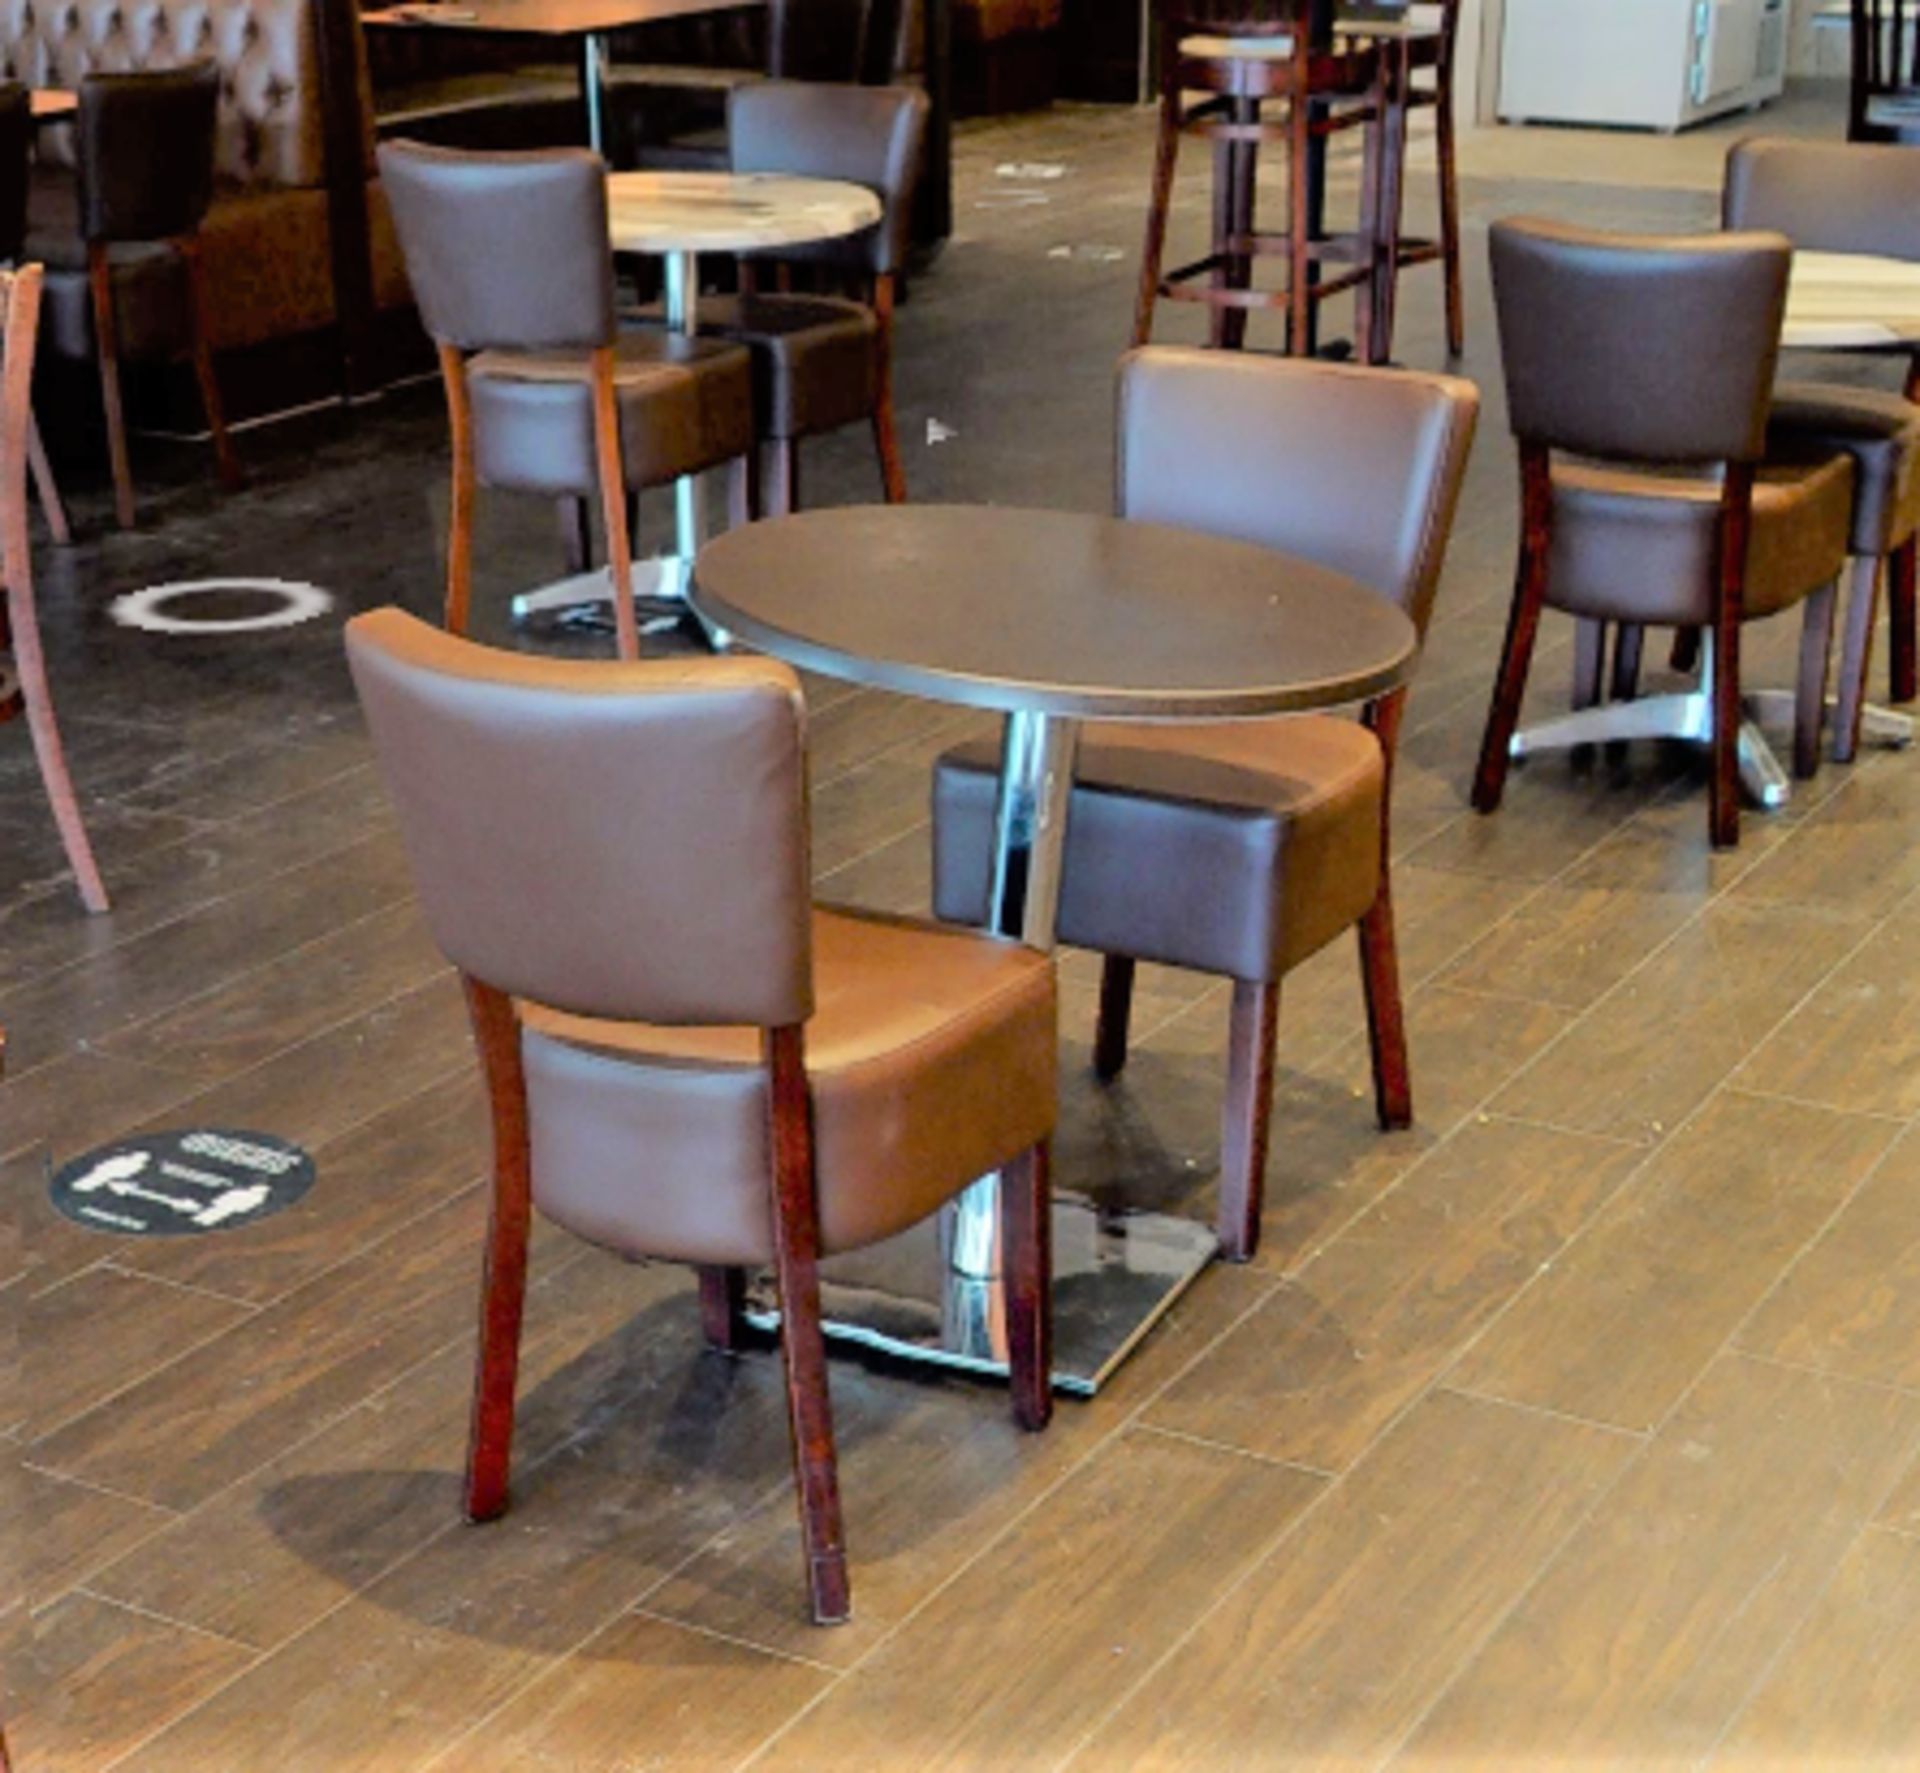 4 x Restaurant Chairs With Brown Leather Seat Pads and Padded Backrests - CL701 - Location: Ashton - Image 8 of 9